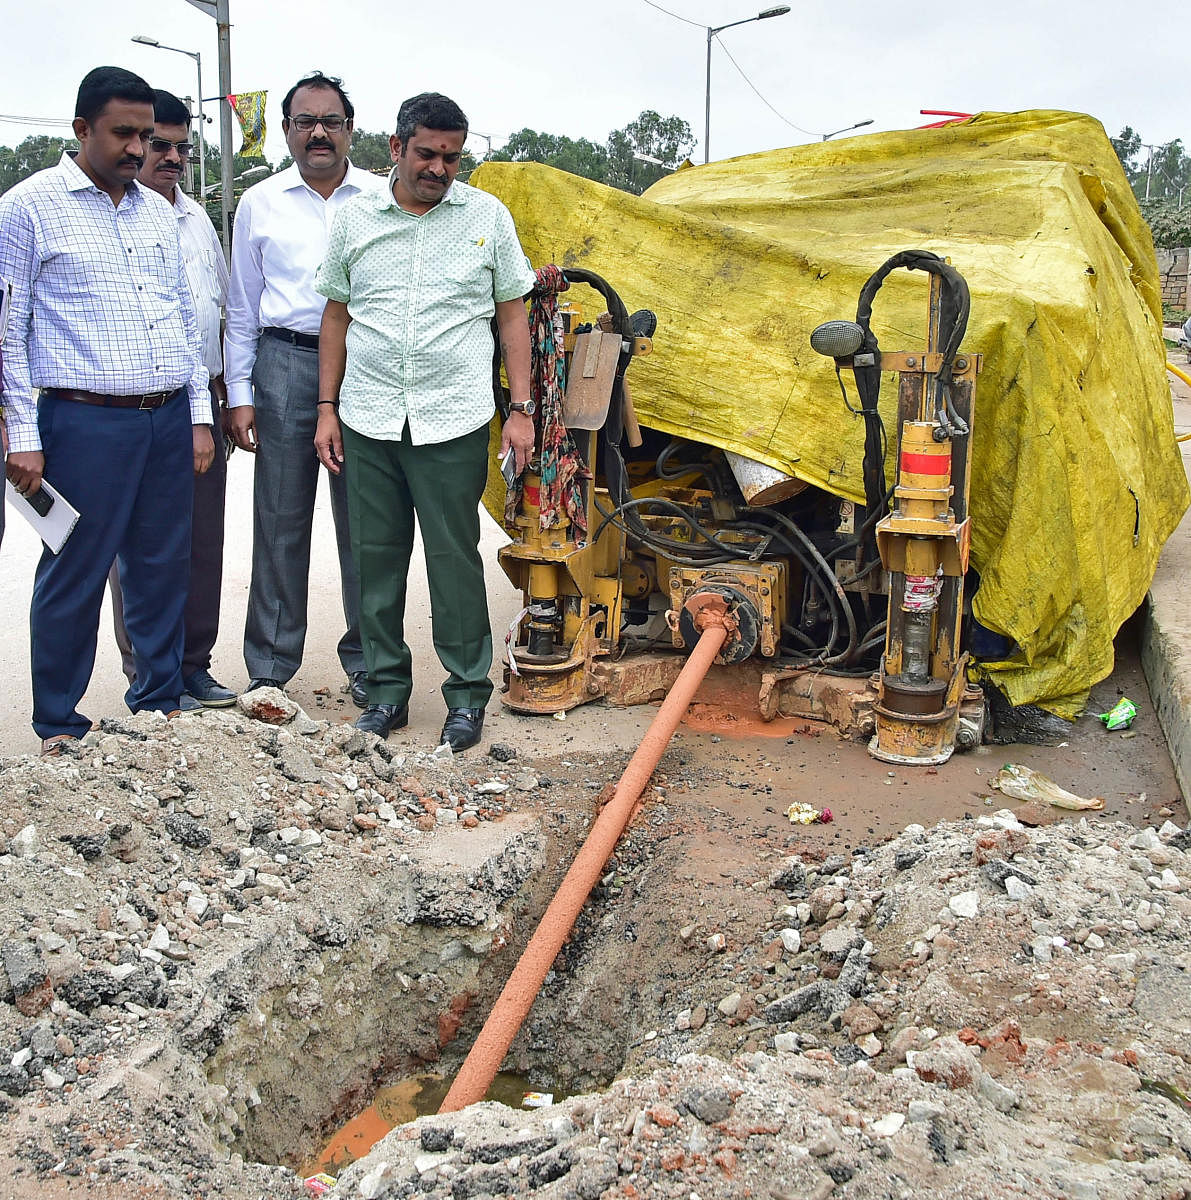 BBMP chief engineer S P Ranganath, joint commissioner (Yelahanka) Dr Ashok and Jakkur corporator K A Munindra Kumar inspect a stretch of Bellahalli Road that was illegally dug up to lay cables. DH PHOTO/RANJU P